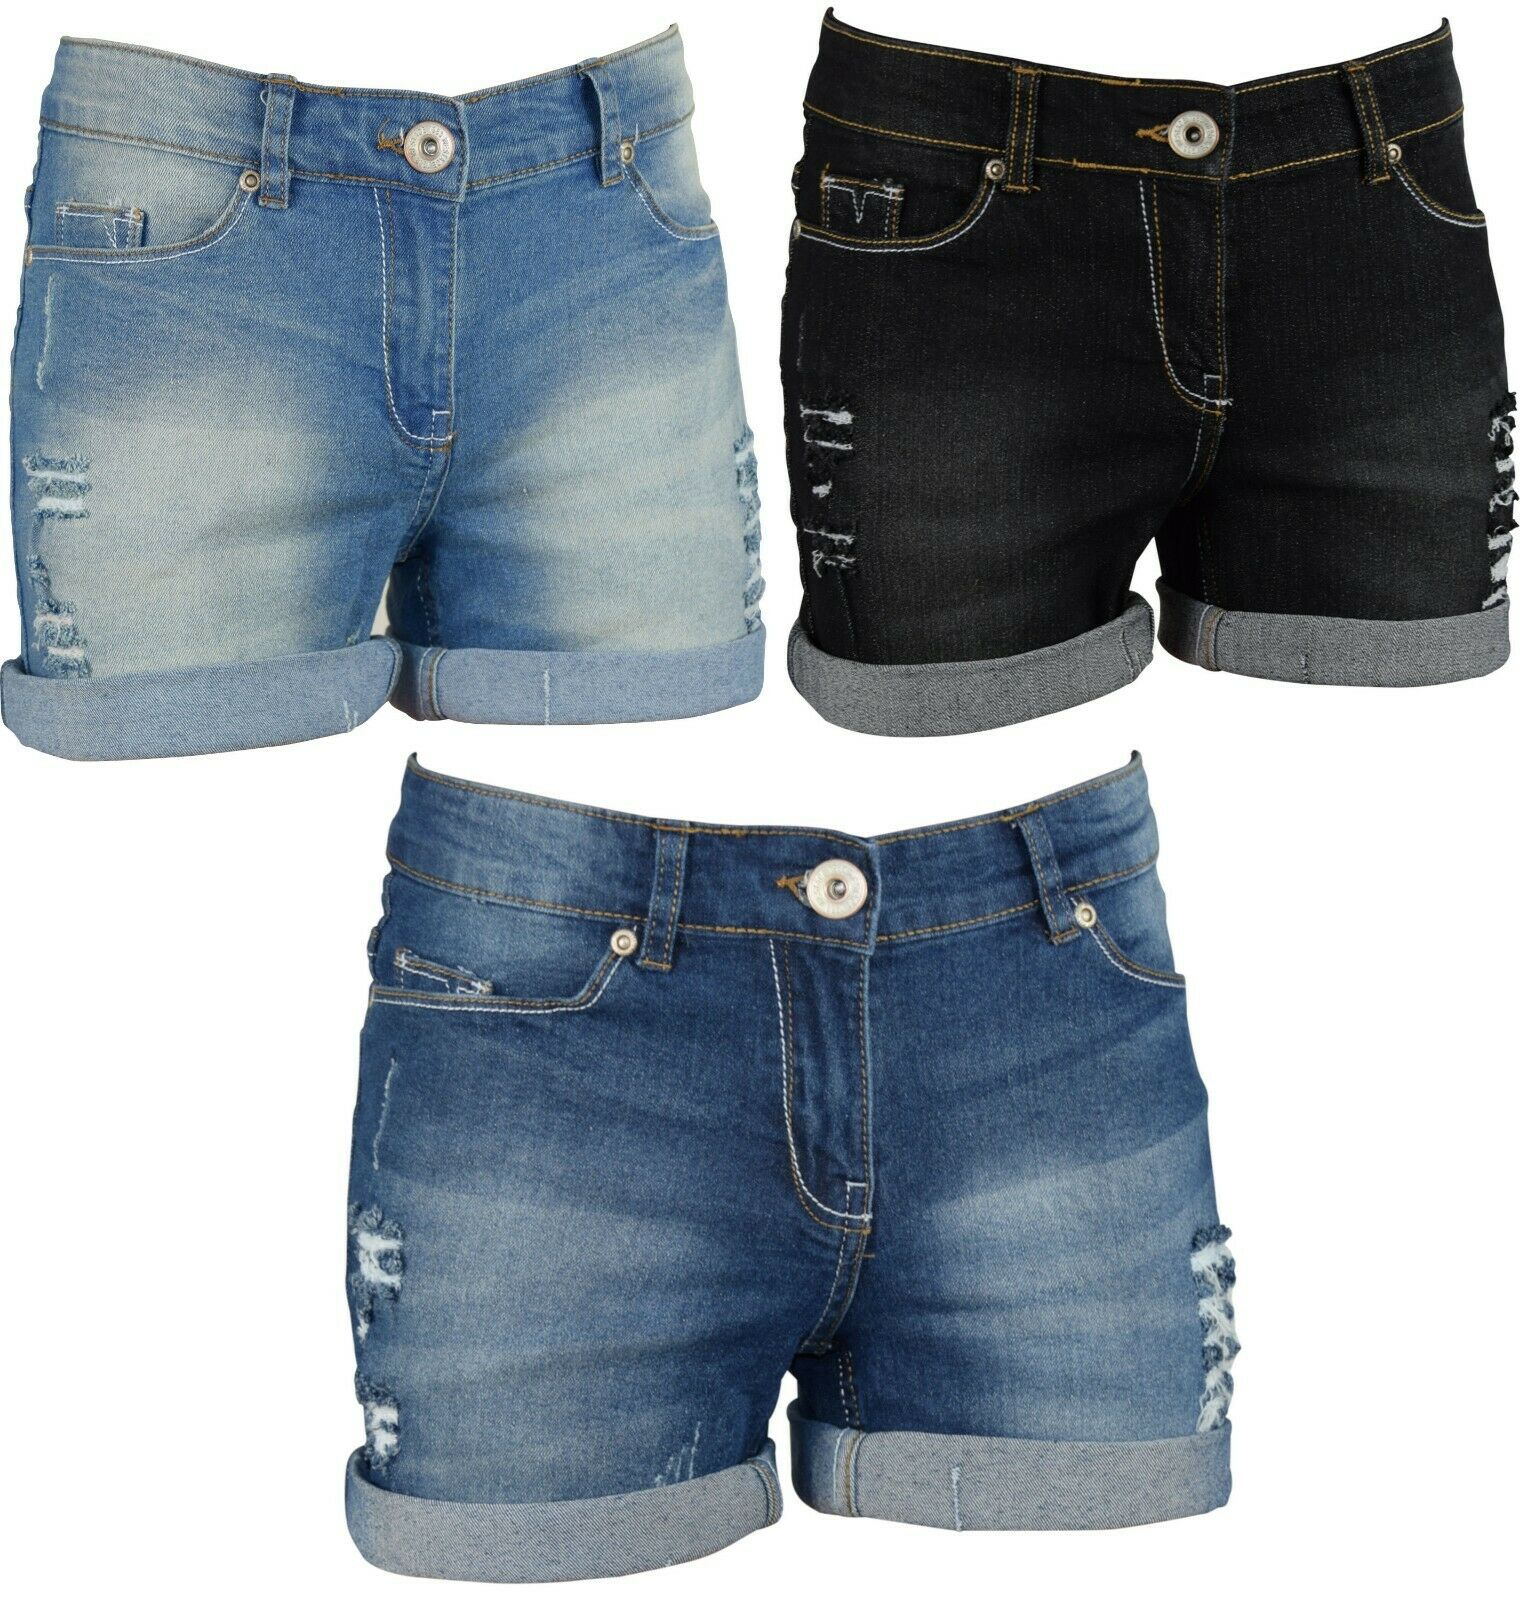 Women's Stretchy Denim Shorts Distressed Jeans Hot Pants Skinny Ripped Turn-up